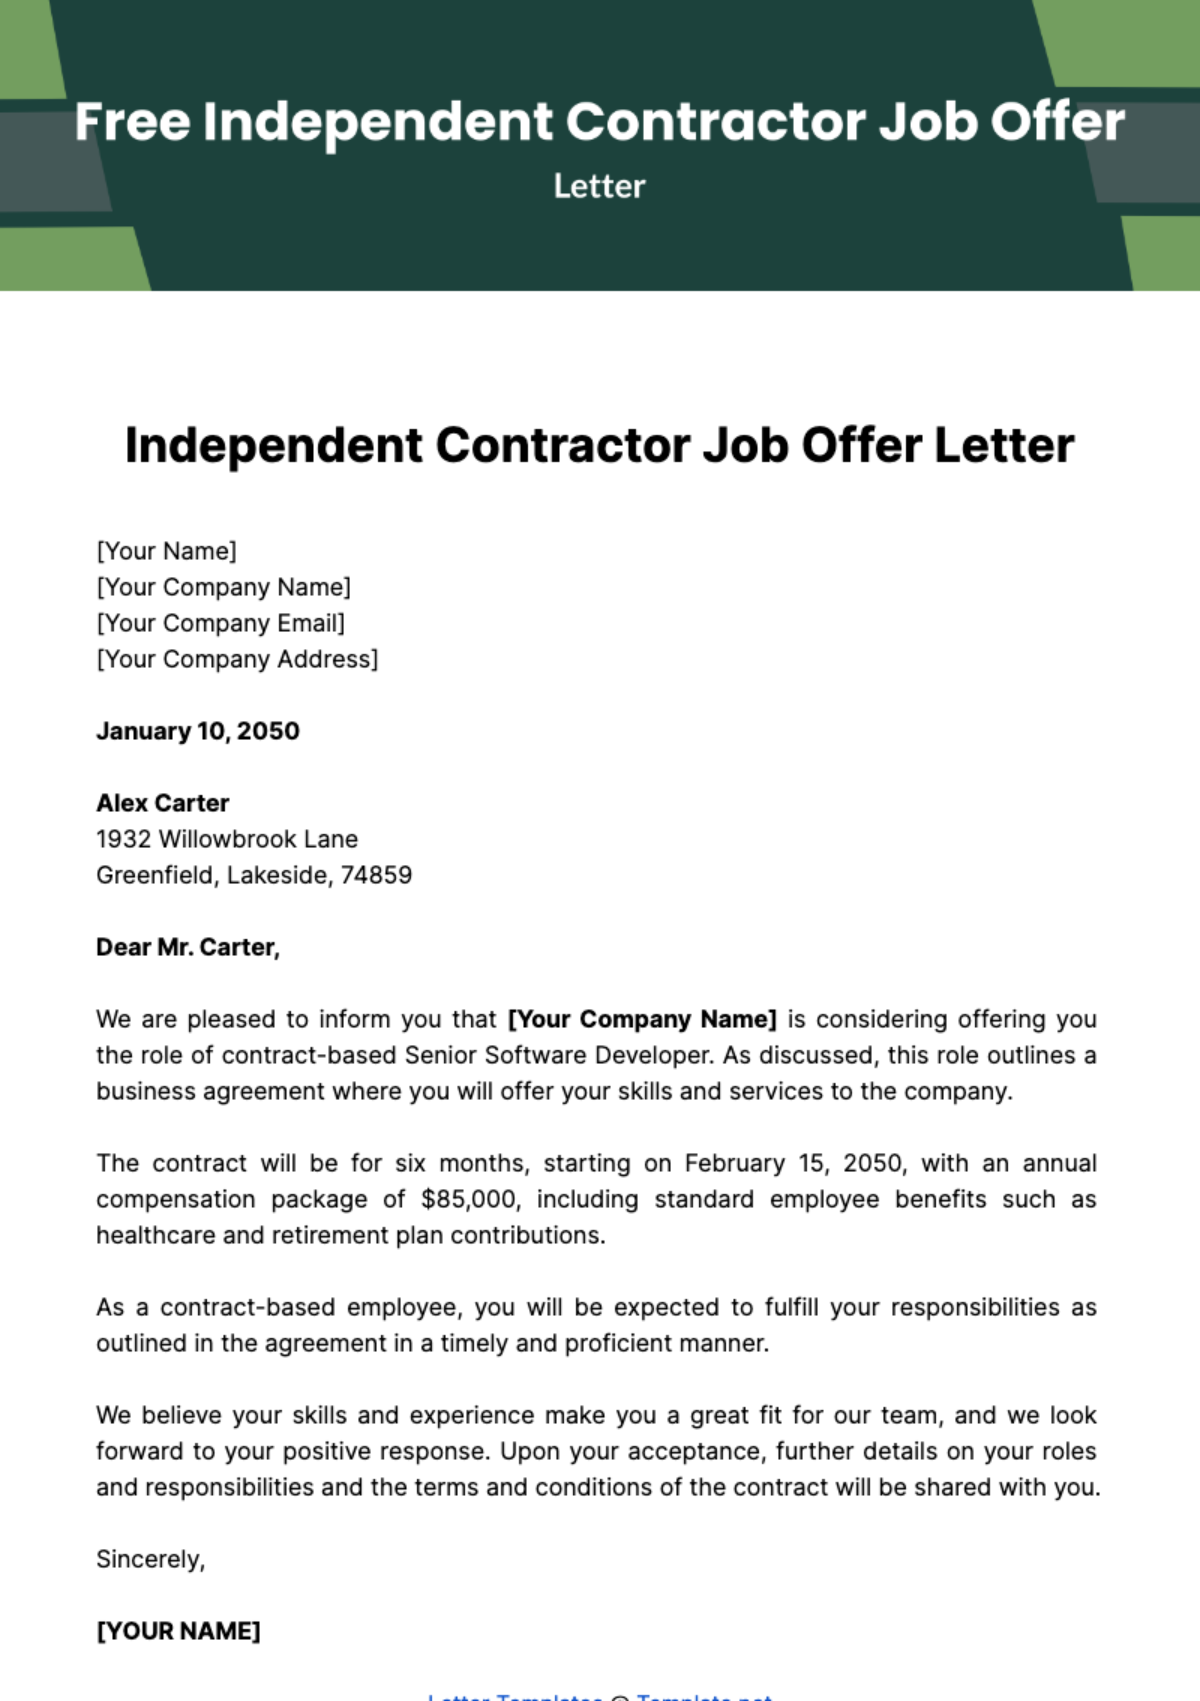 Free Independent Contractor Job Offer Letter Template